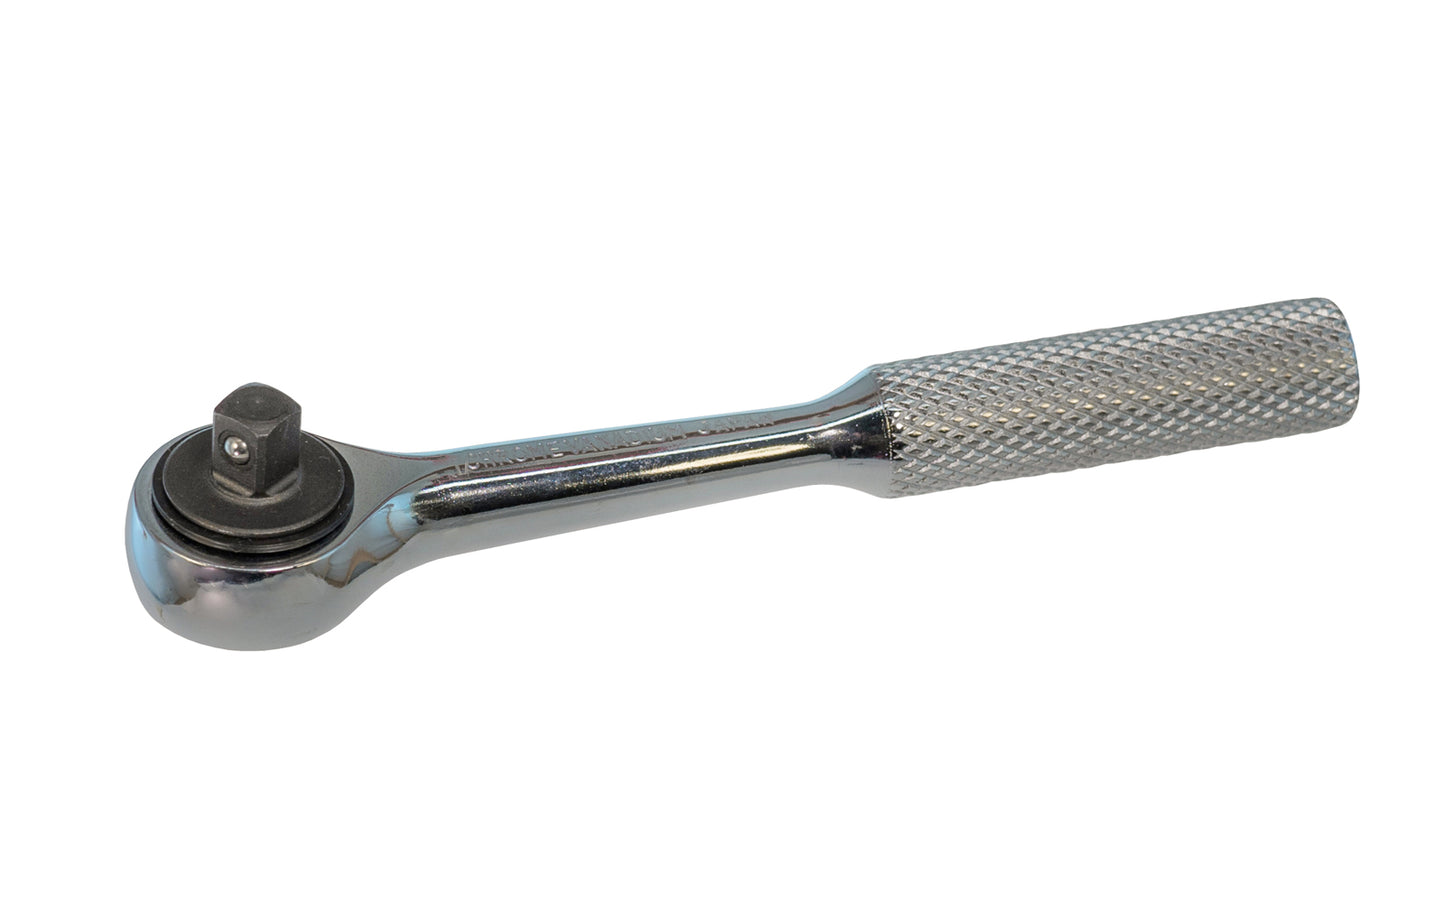 This 5" Small Ratchet Handle 1/4" Dr. is made of Chrome Vanadium Steel with an etched steel handle for a good grip. Easy change reversible ratchet direction. 5" overall length. 1/4" drive.   Made in Japan.